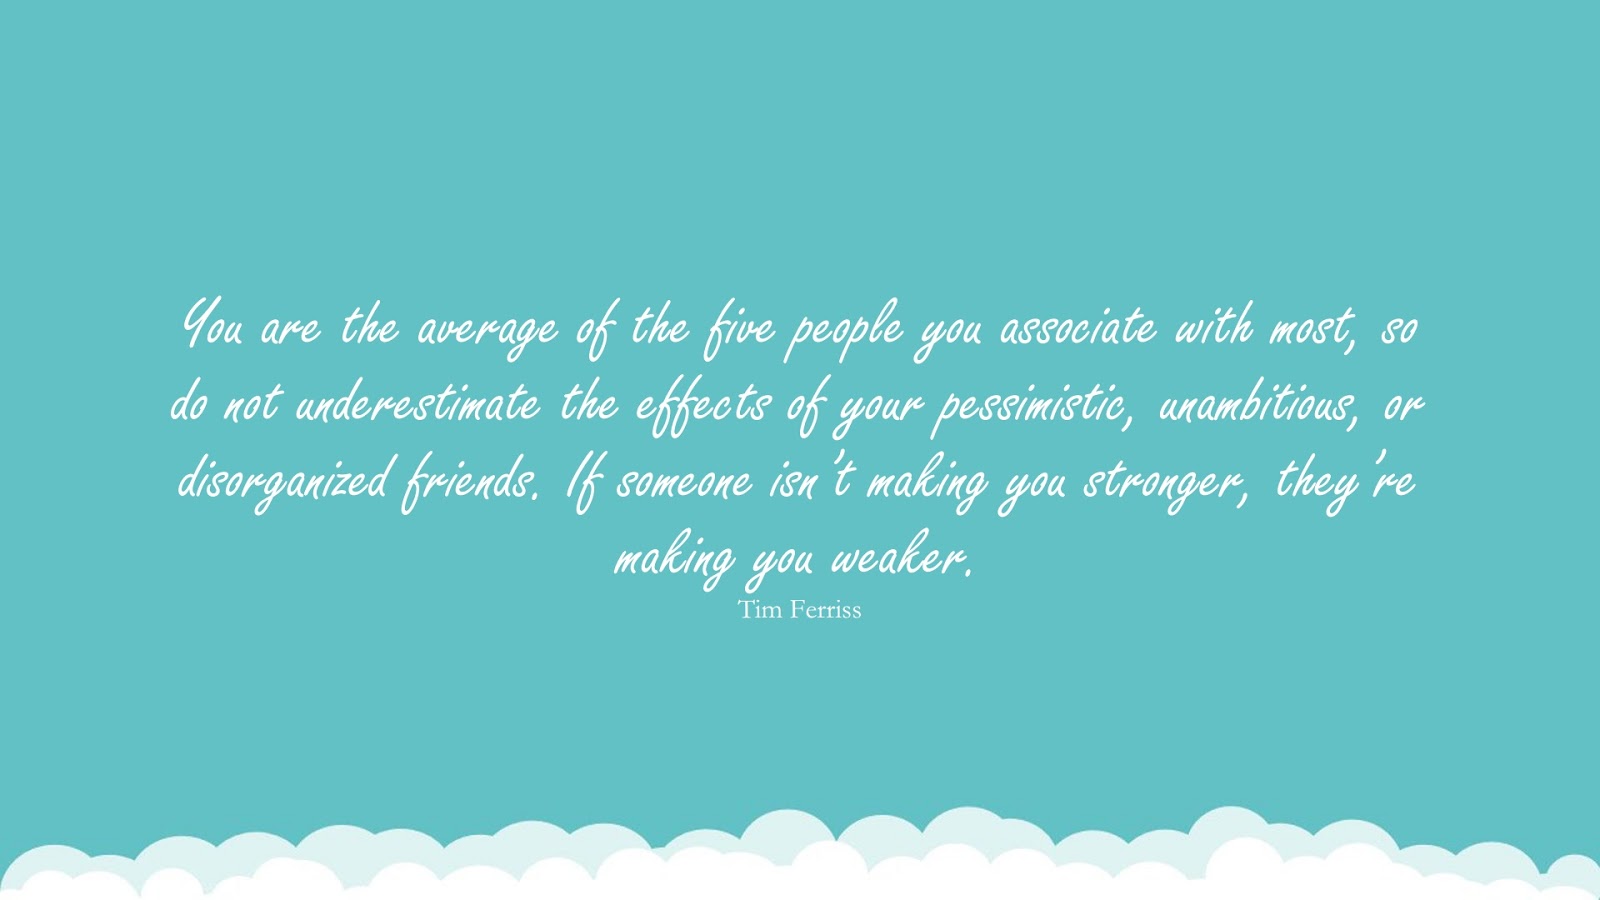 You are the average of the five people you associate with most, so do not underestimate the effects of your pessimistic, unambitious, or disorganized friends. If someone isn’t making you stronger, they’re making you weaker. (Tim Ferriss);  #TimFerrissQuotesandSayings